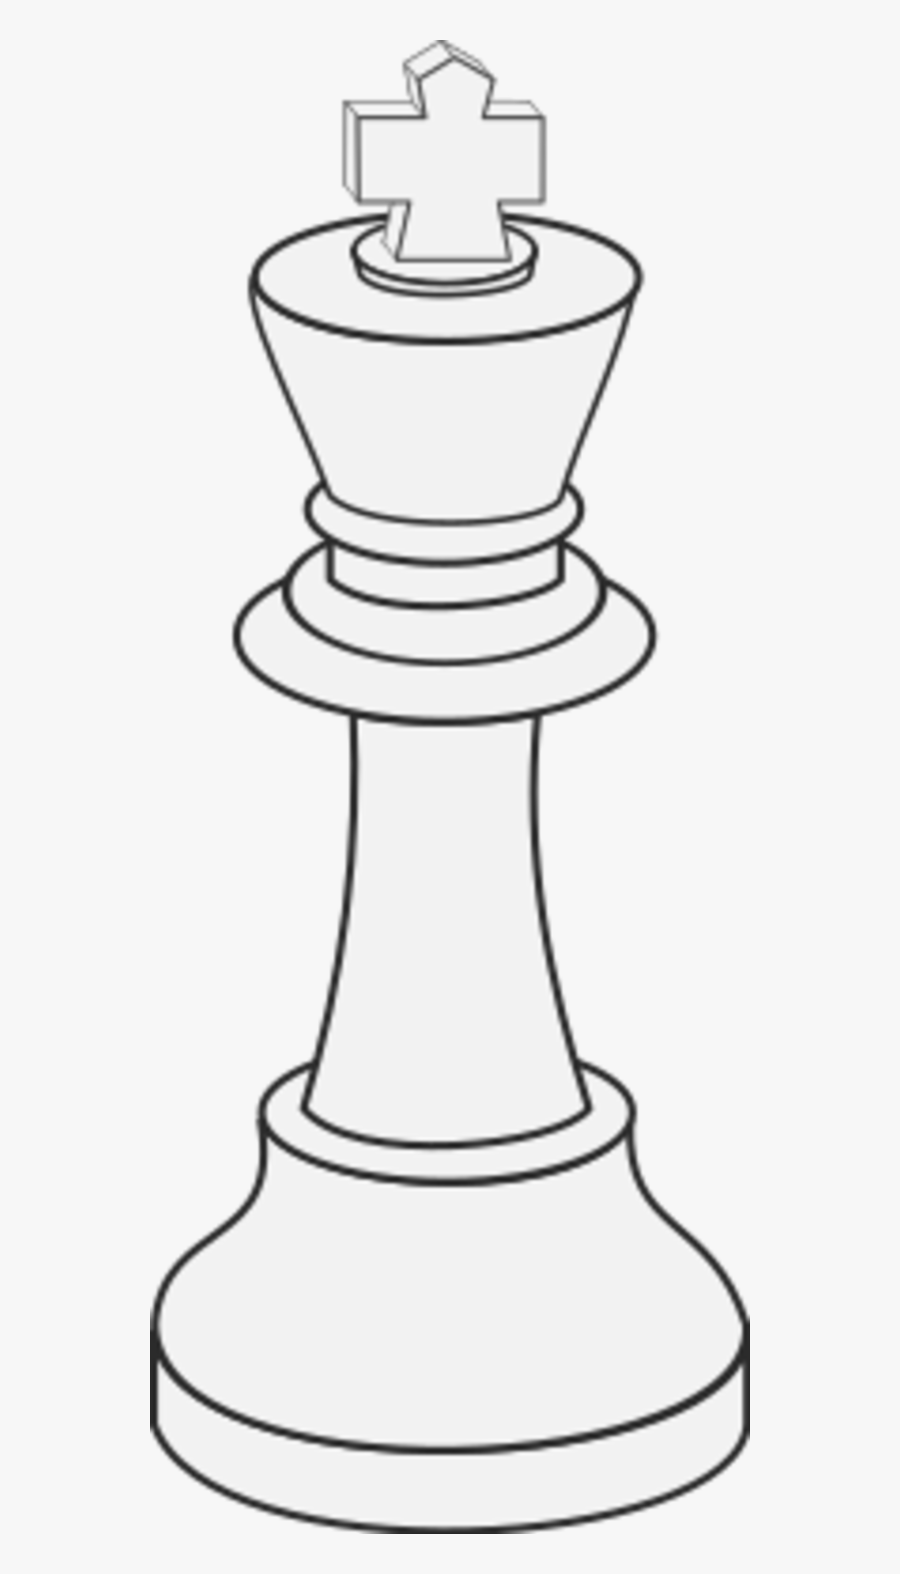 White King Chess Piece, Transparent Clipart